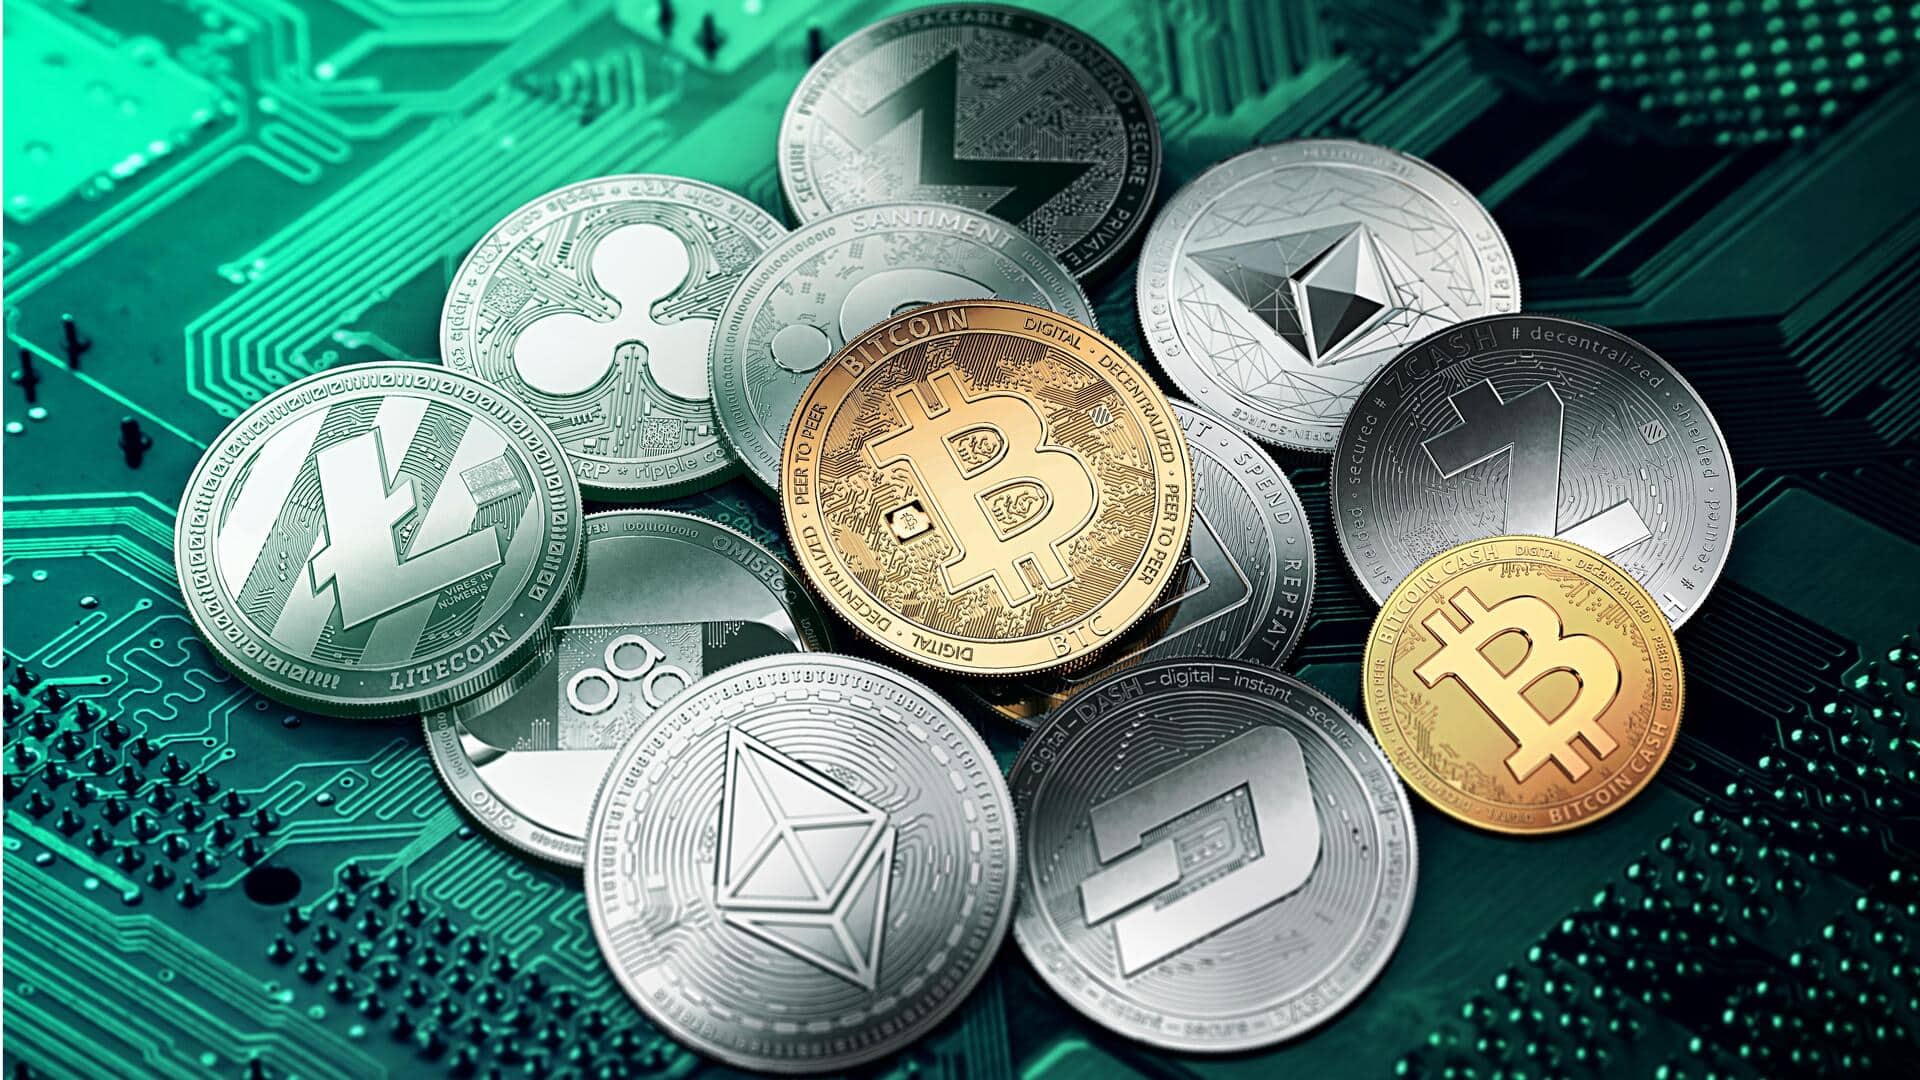 Cryptocurrency prices today: Check rates of Bitcoin, Dogecoin, Tether, Solana